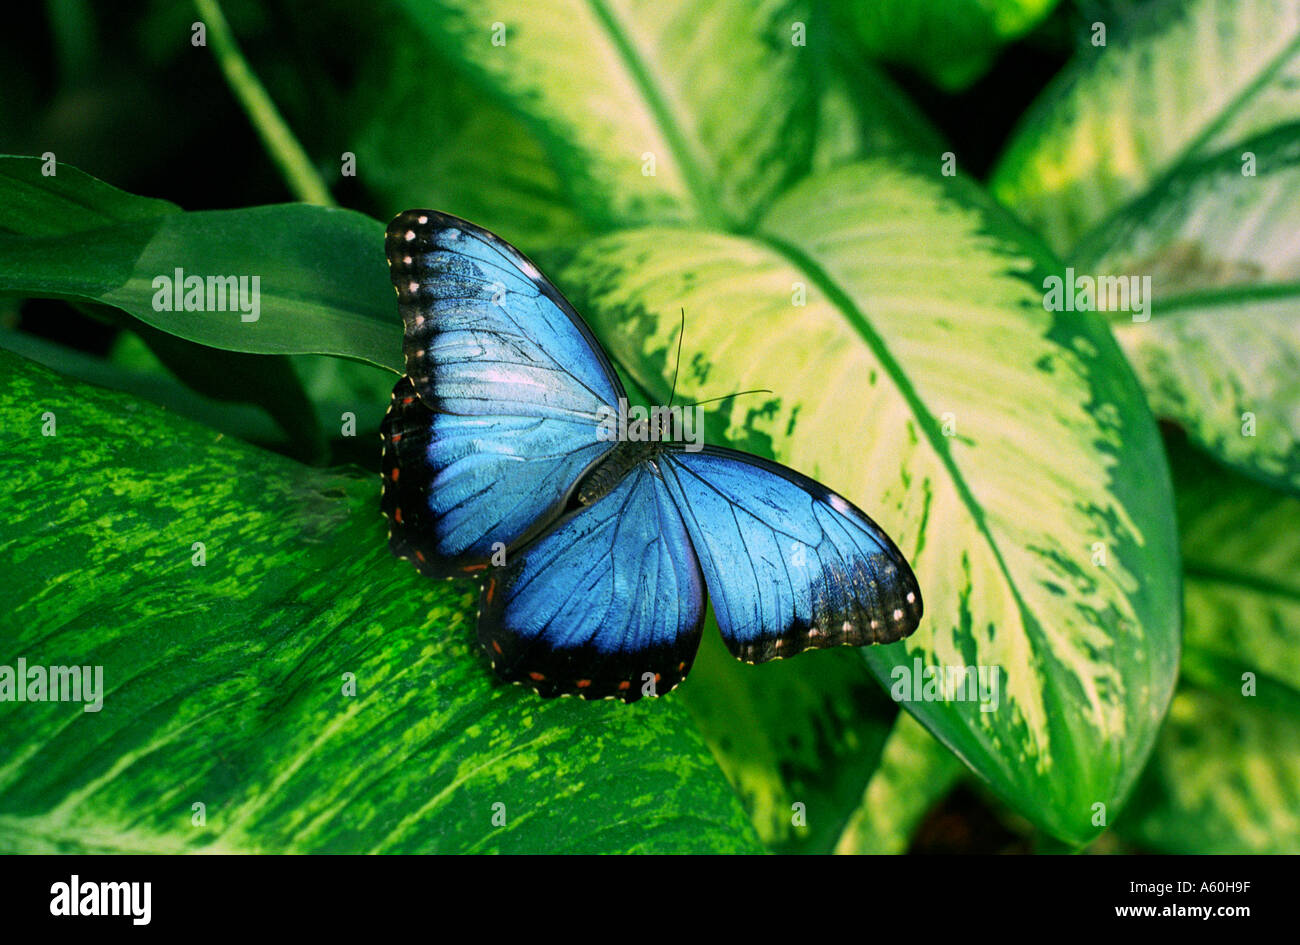 Blue butterfly morpho on leaf in exotic tropical situation Stock Photo